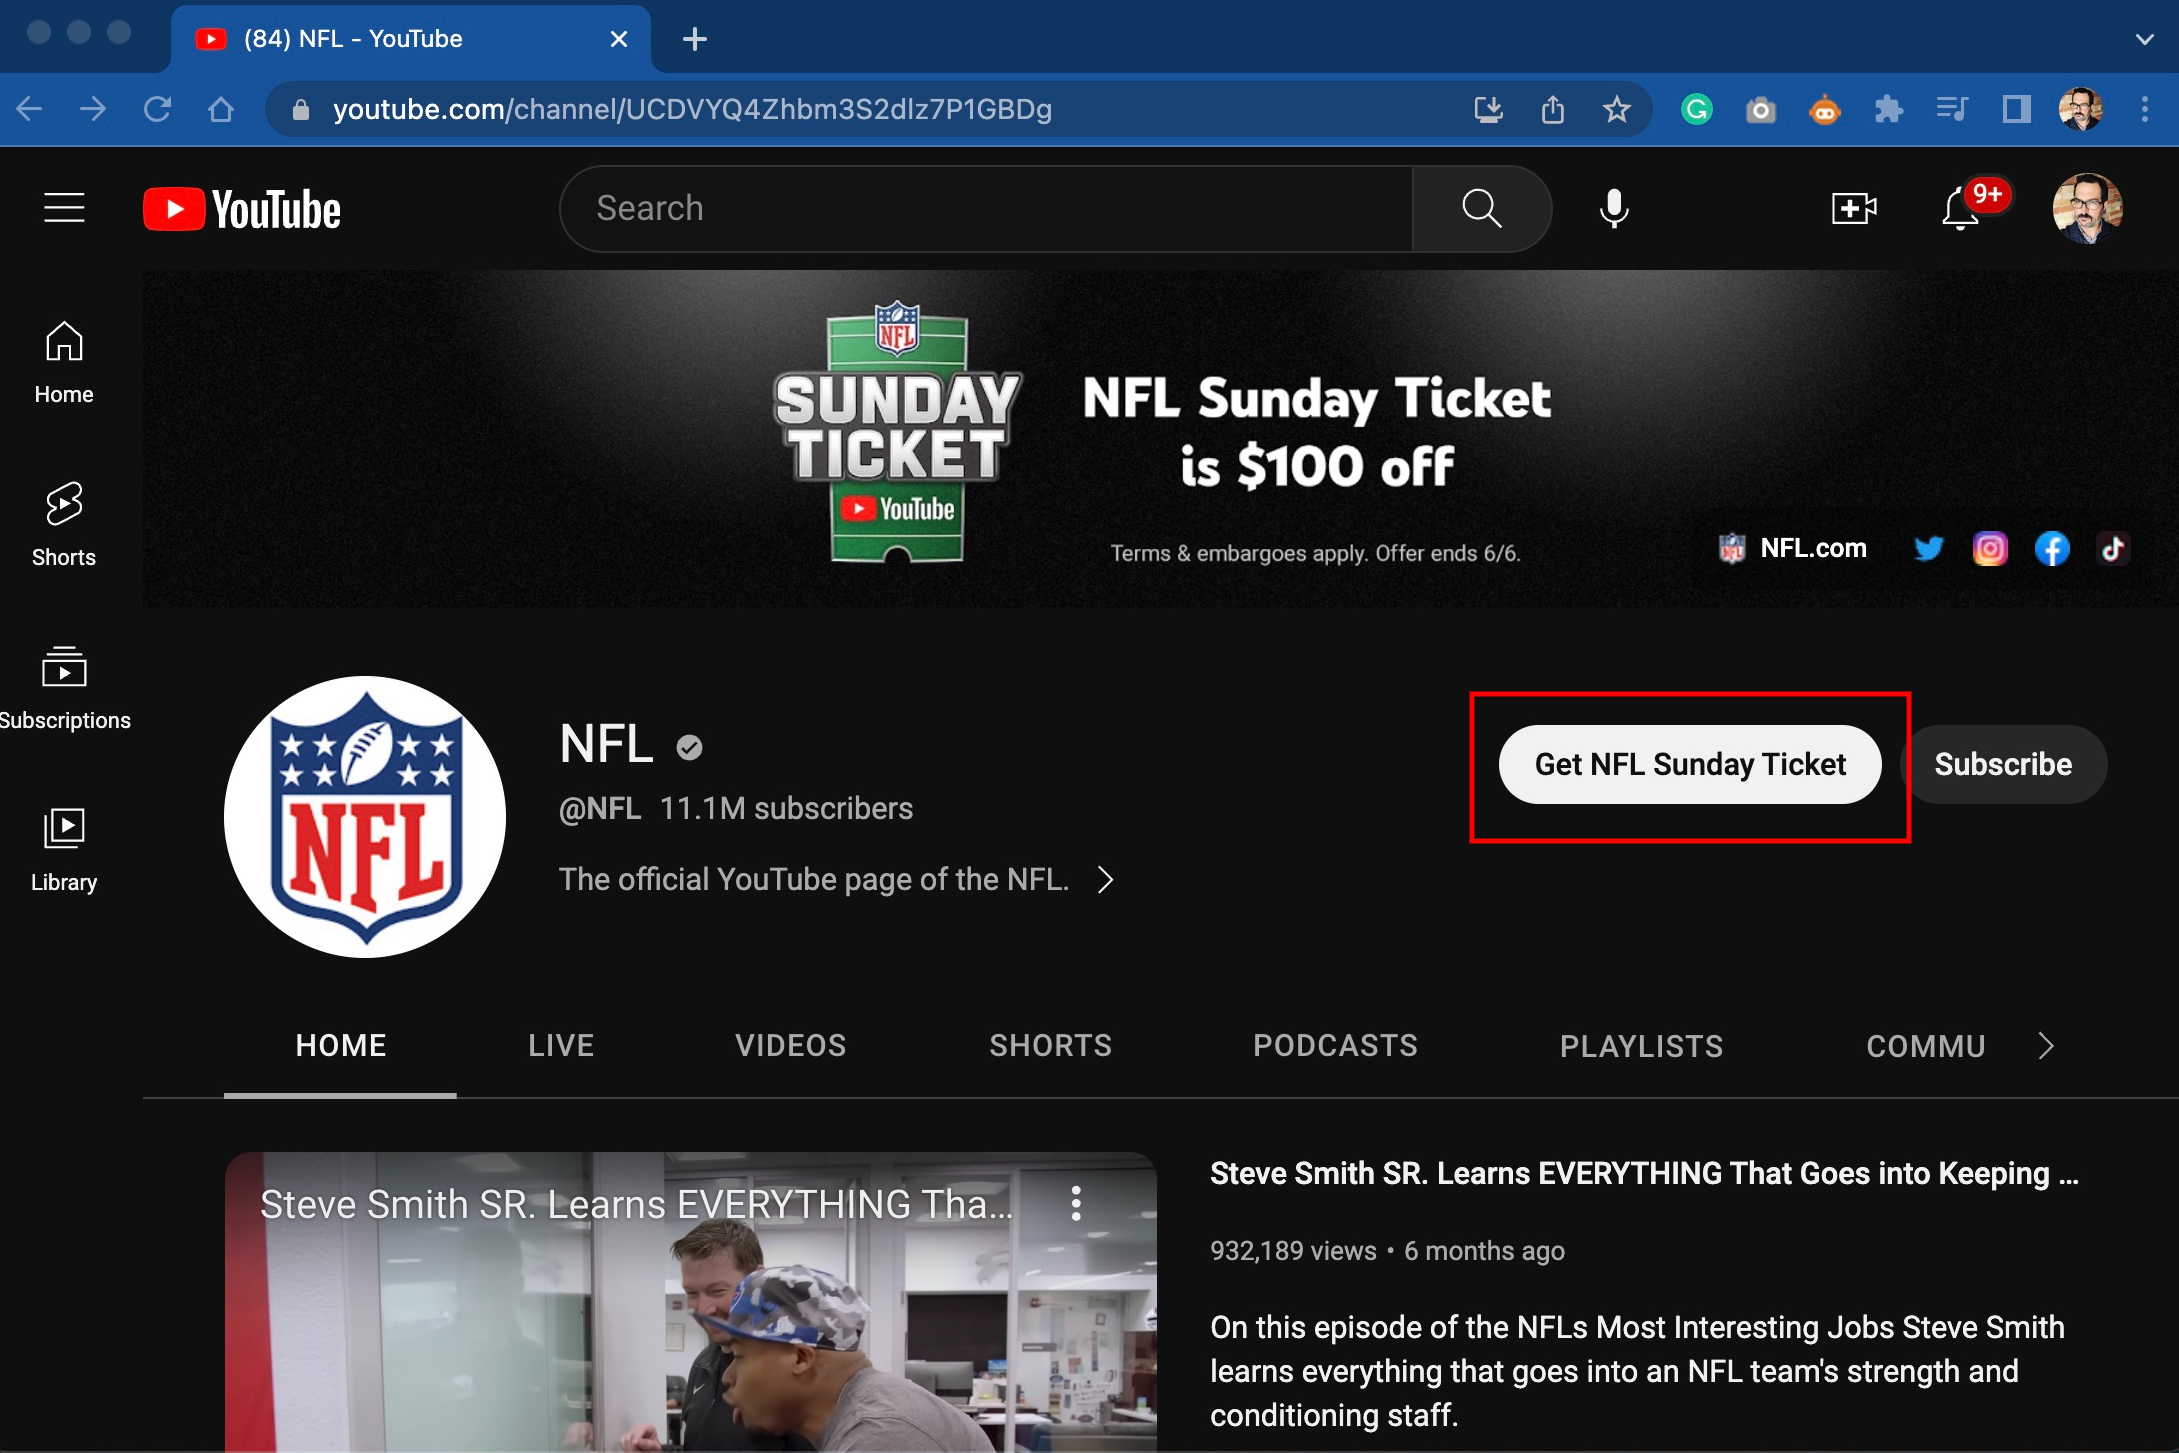 How to get NFL Sunday Ticket in 2023 on YouTube and YouTube TV Digital Trends